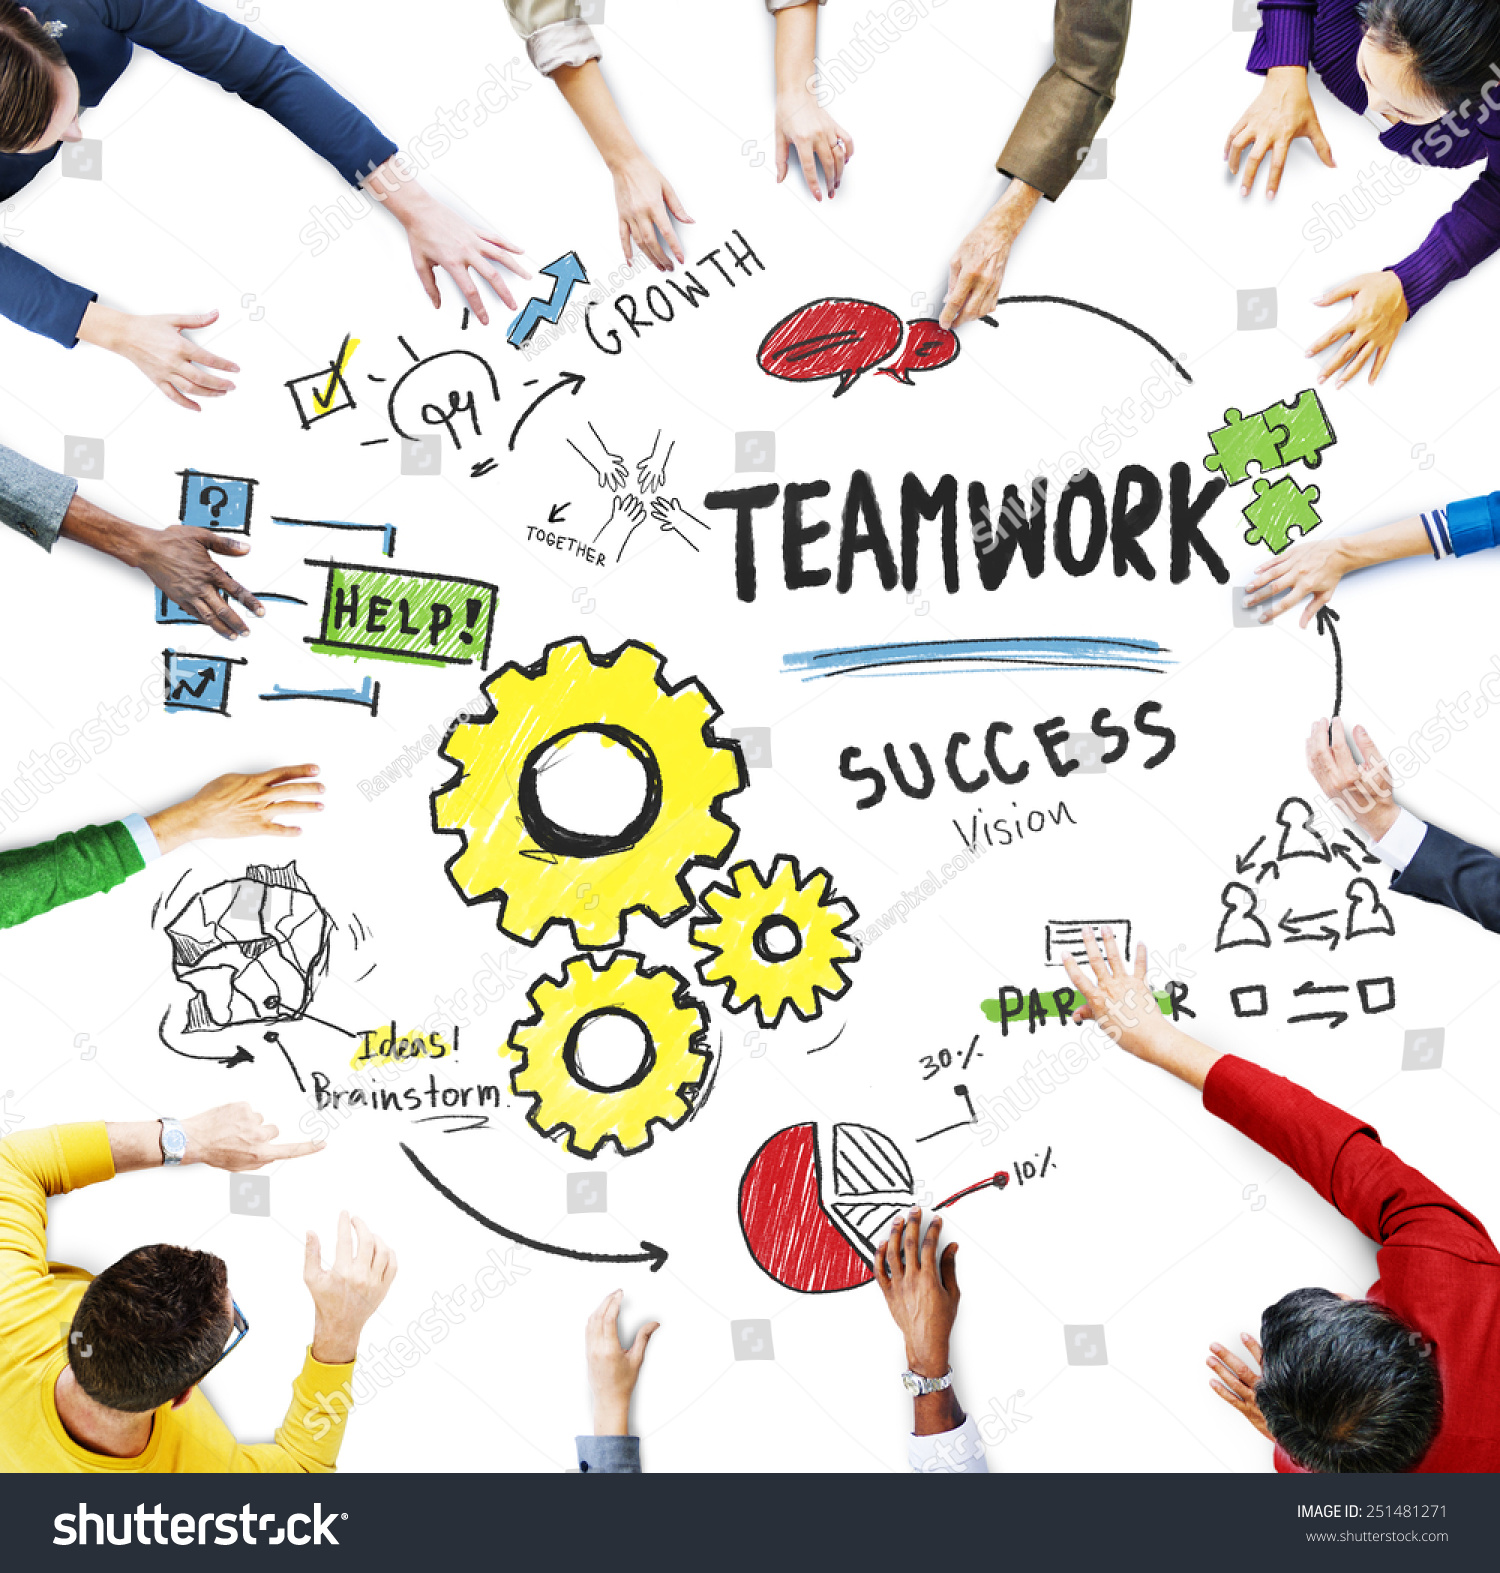 Teamwork Team Together Collaboration Meeting Brainstorming Stock Photo ...